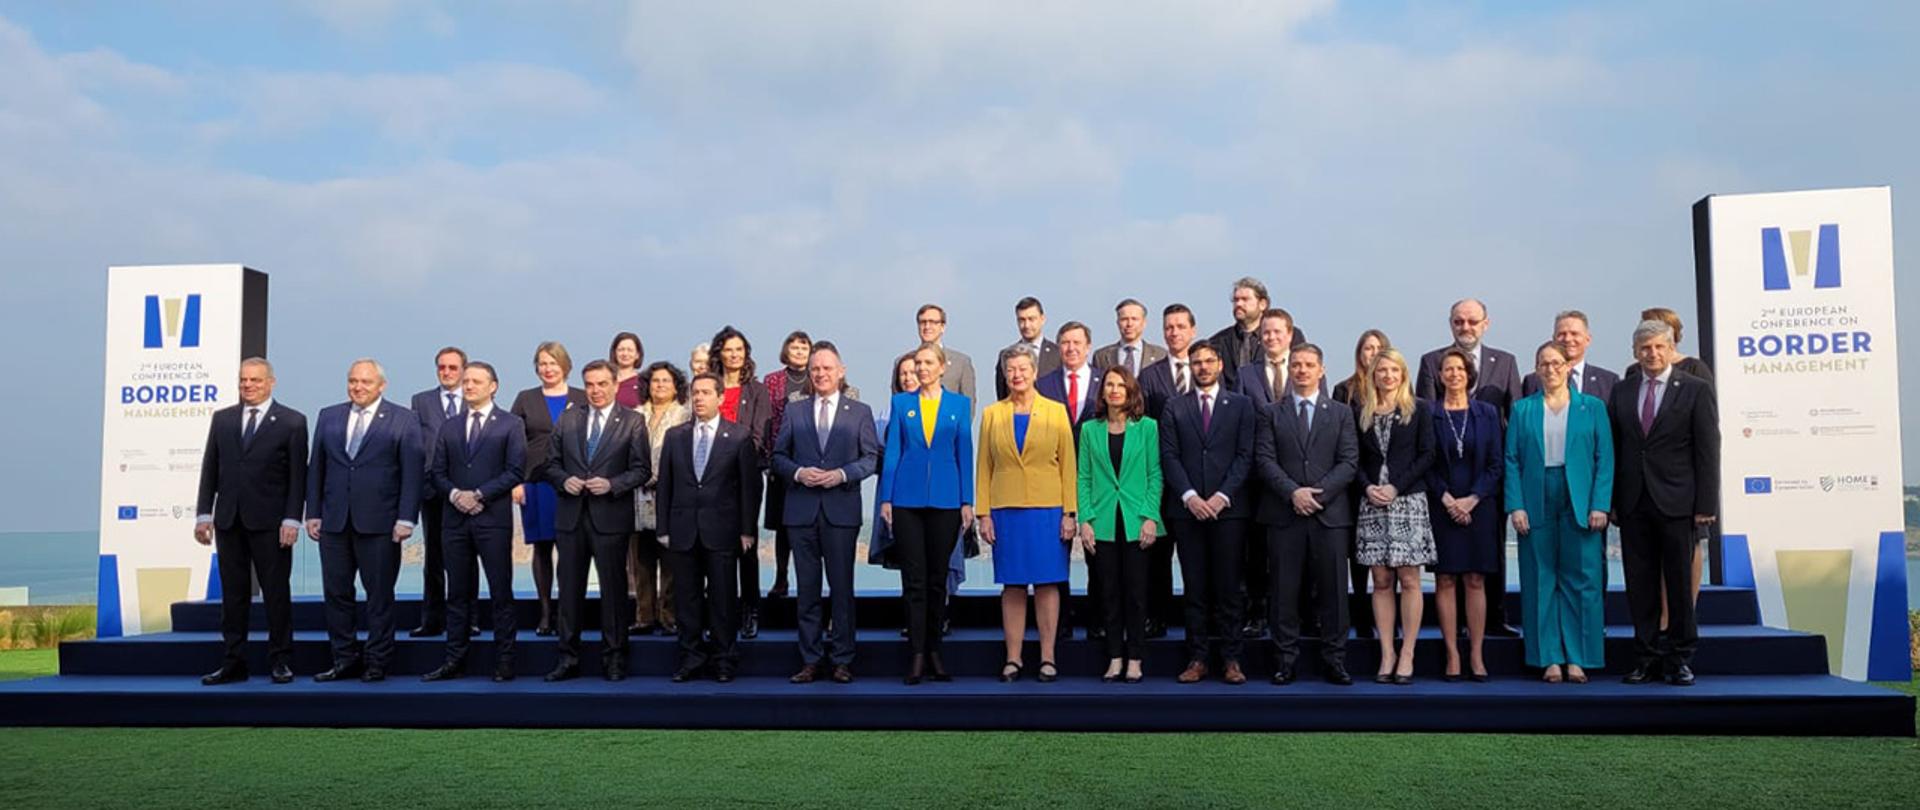 Group photo of the participants of the 2nd European Conference on Border Management organized jointly by Poland, Greece, Lithuania and Austria.